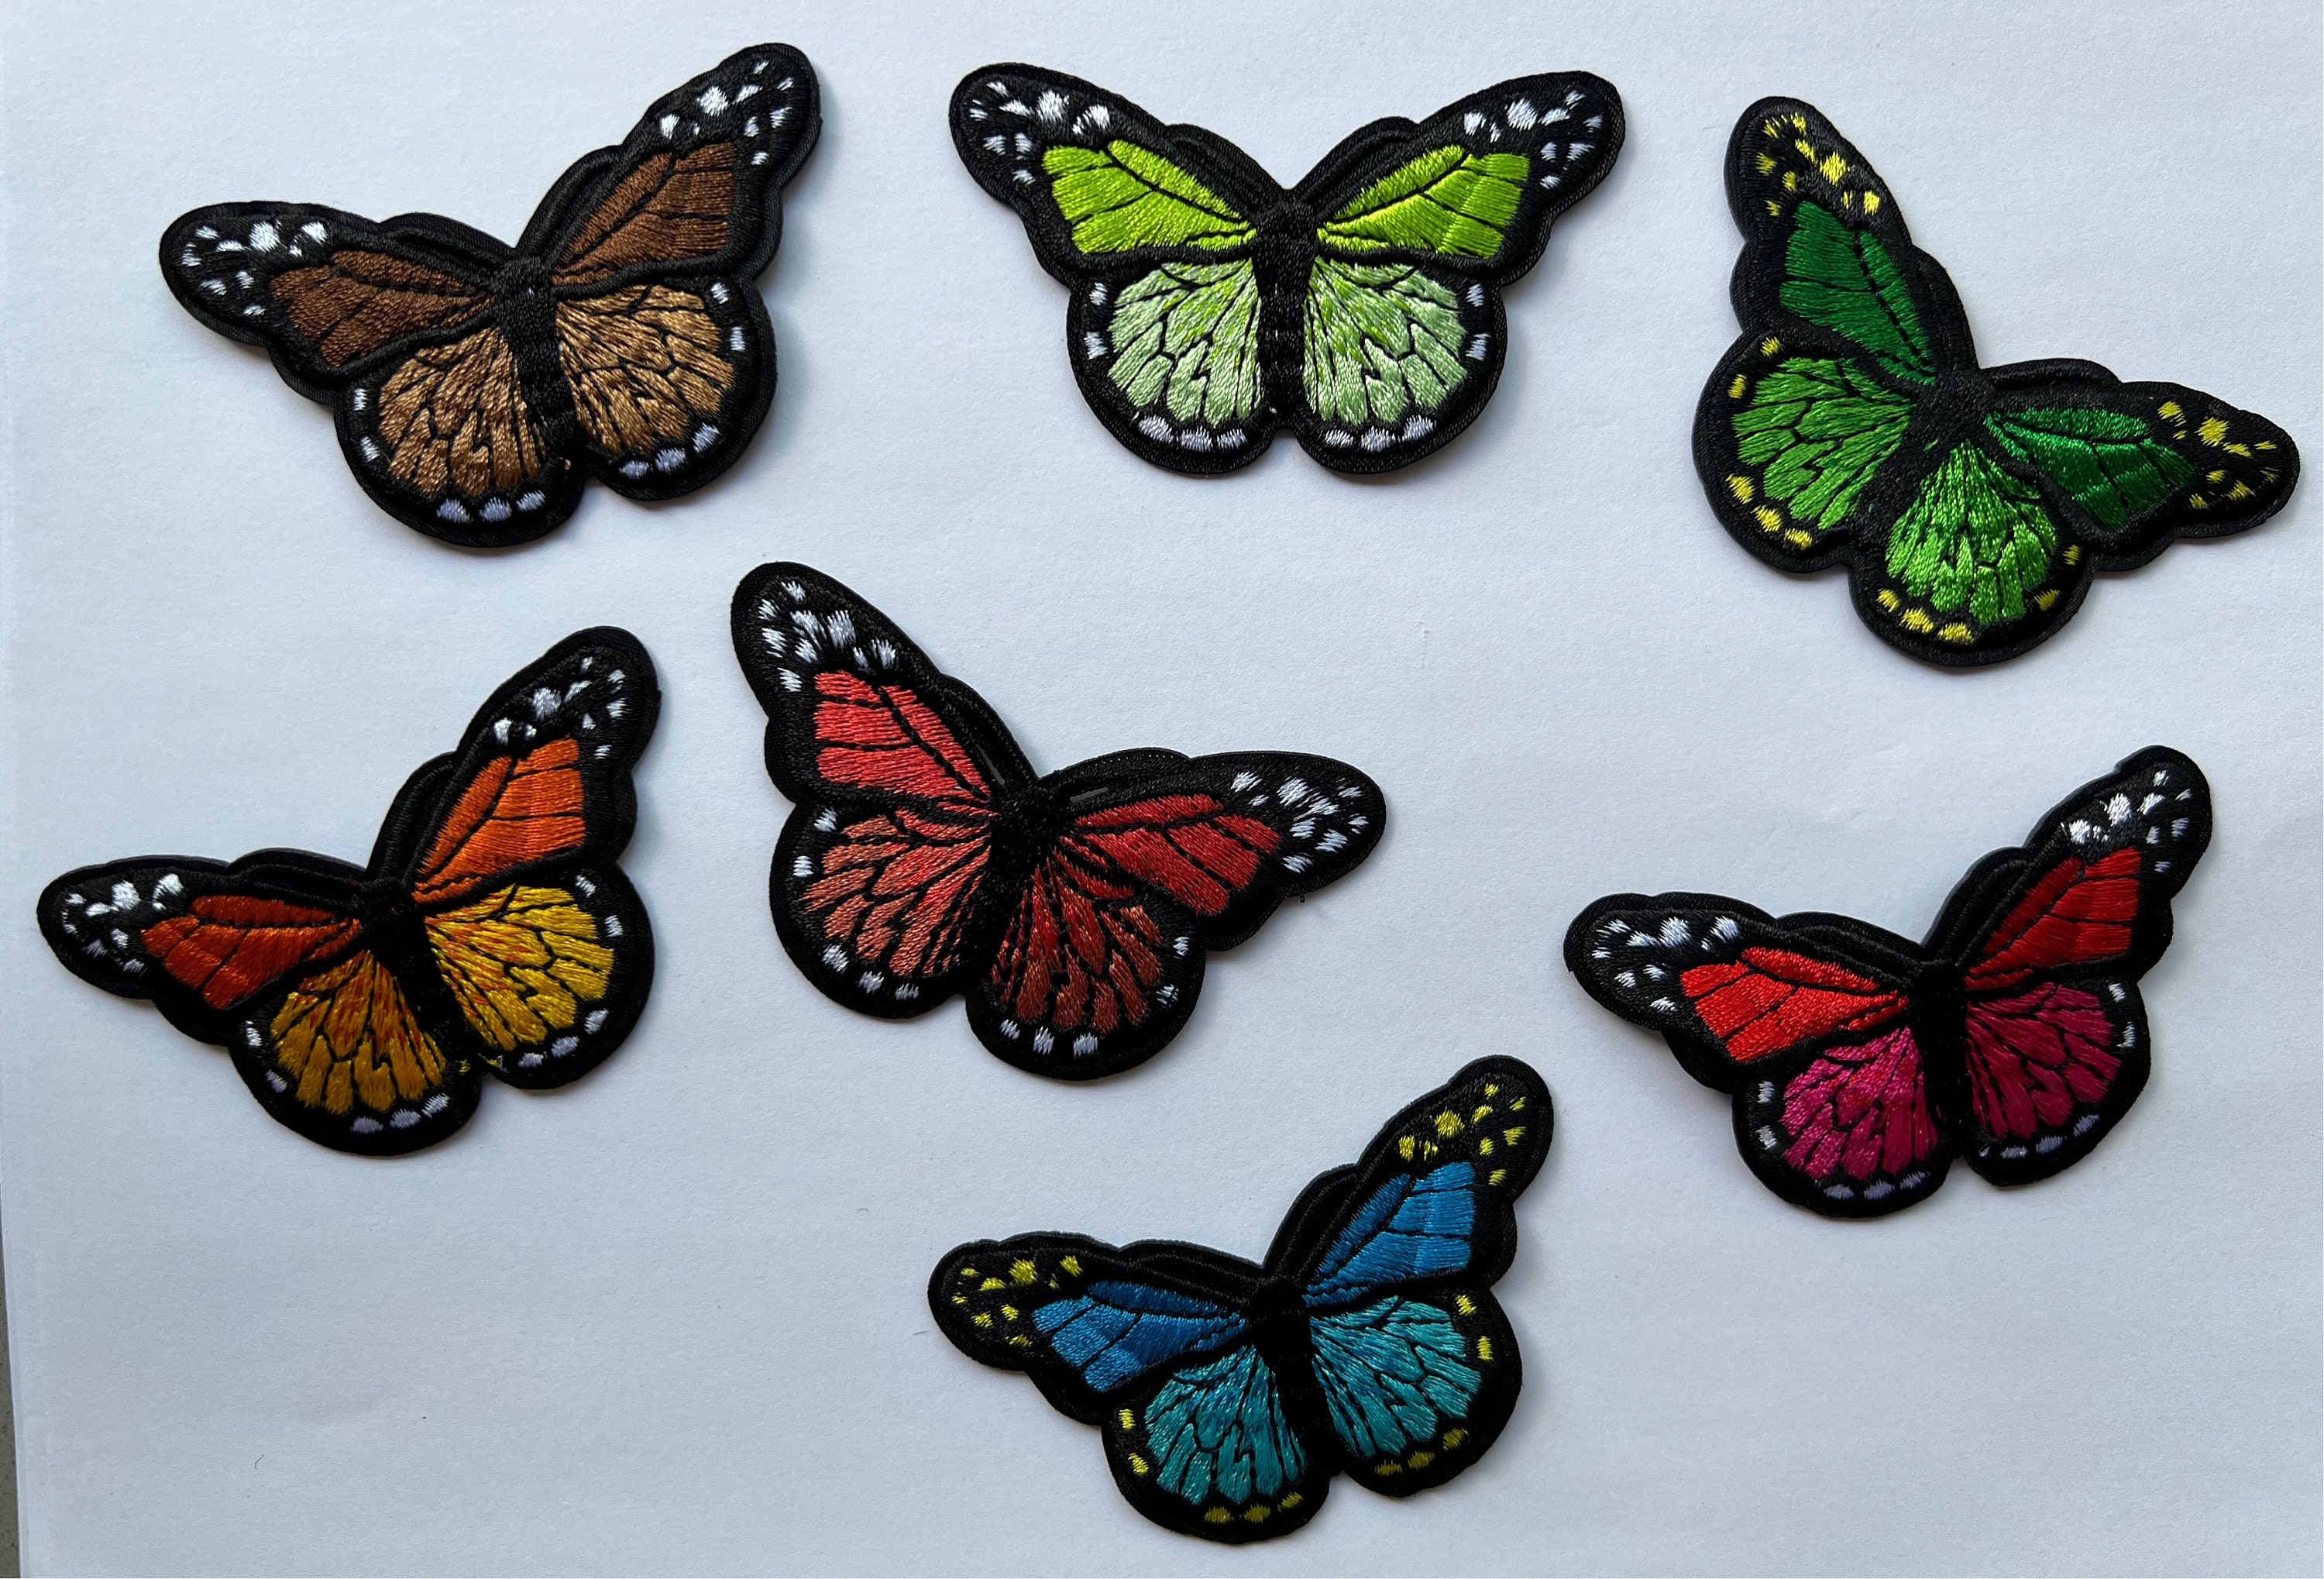 Cue Air Butterfly Iron on Transfer for T-shirts DIY Fabric Stickers for Clothing, Adult Unisex, Size: As Picture Shown